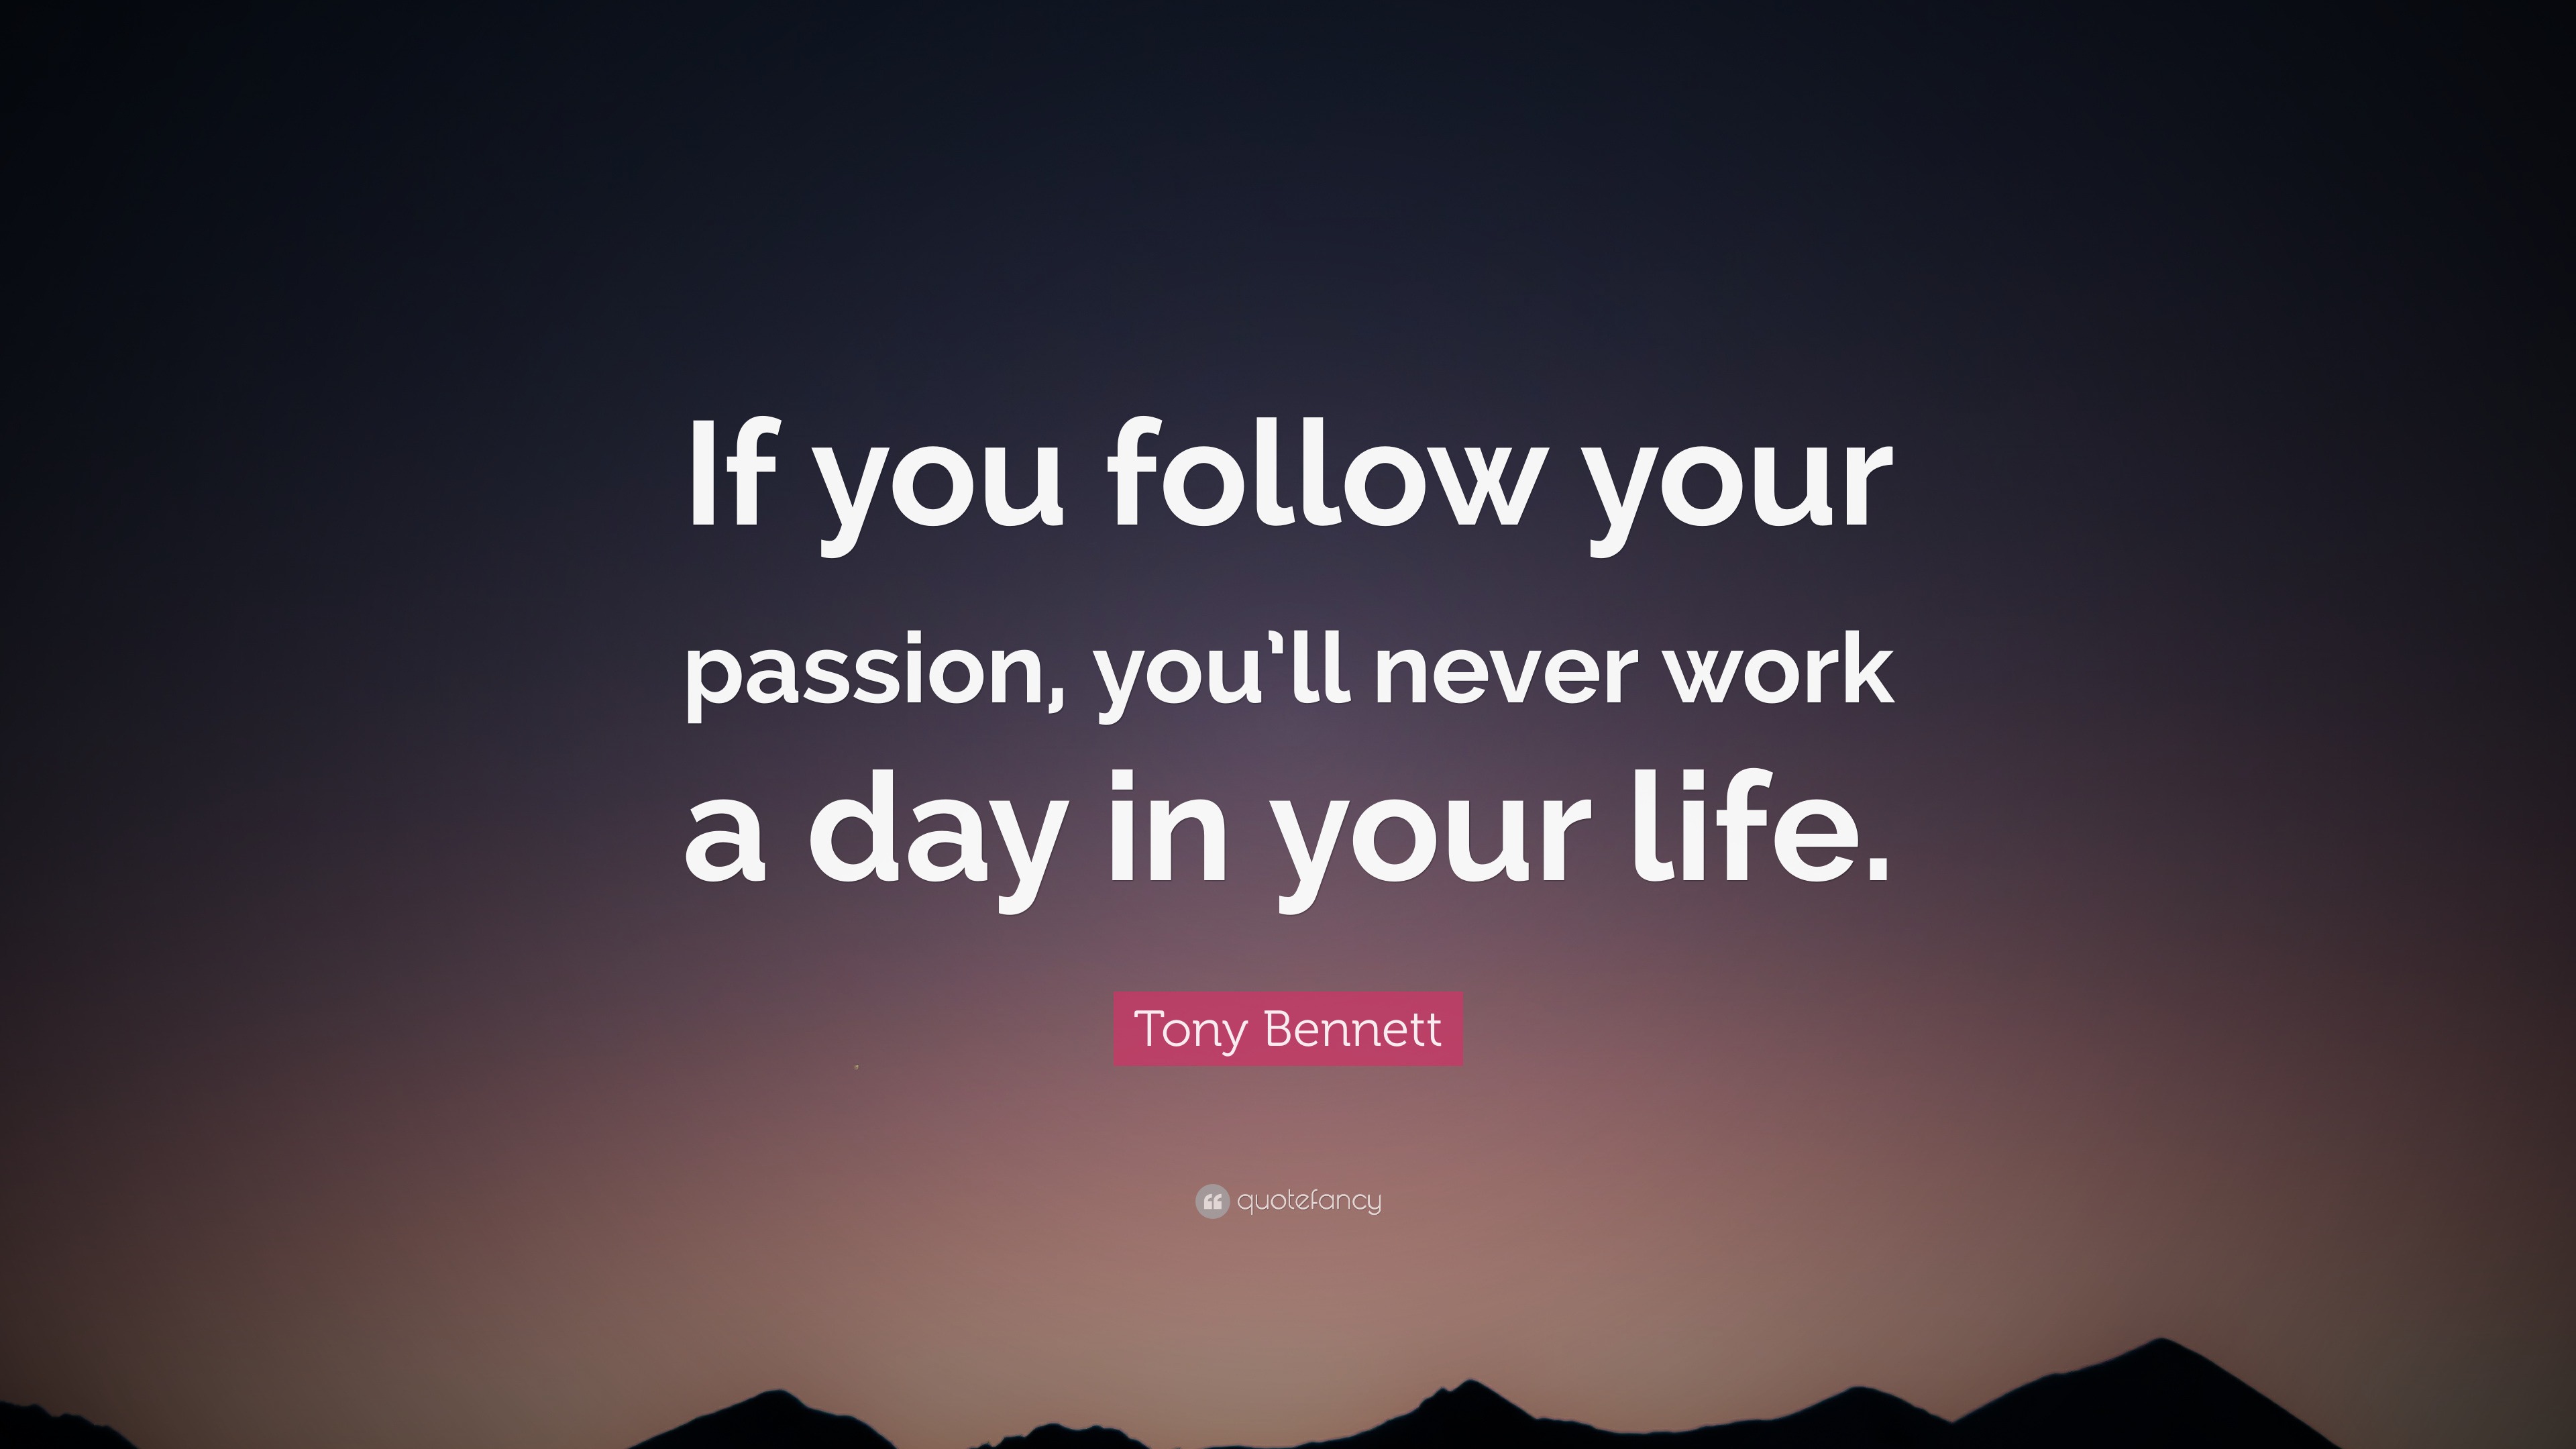 Tony Bennett Quote “If you follow your passion you ll never work